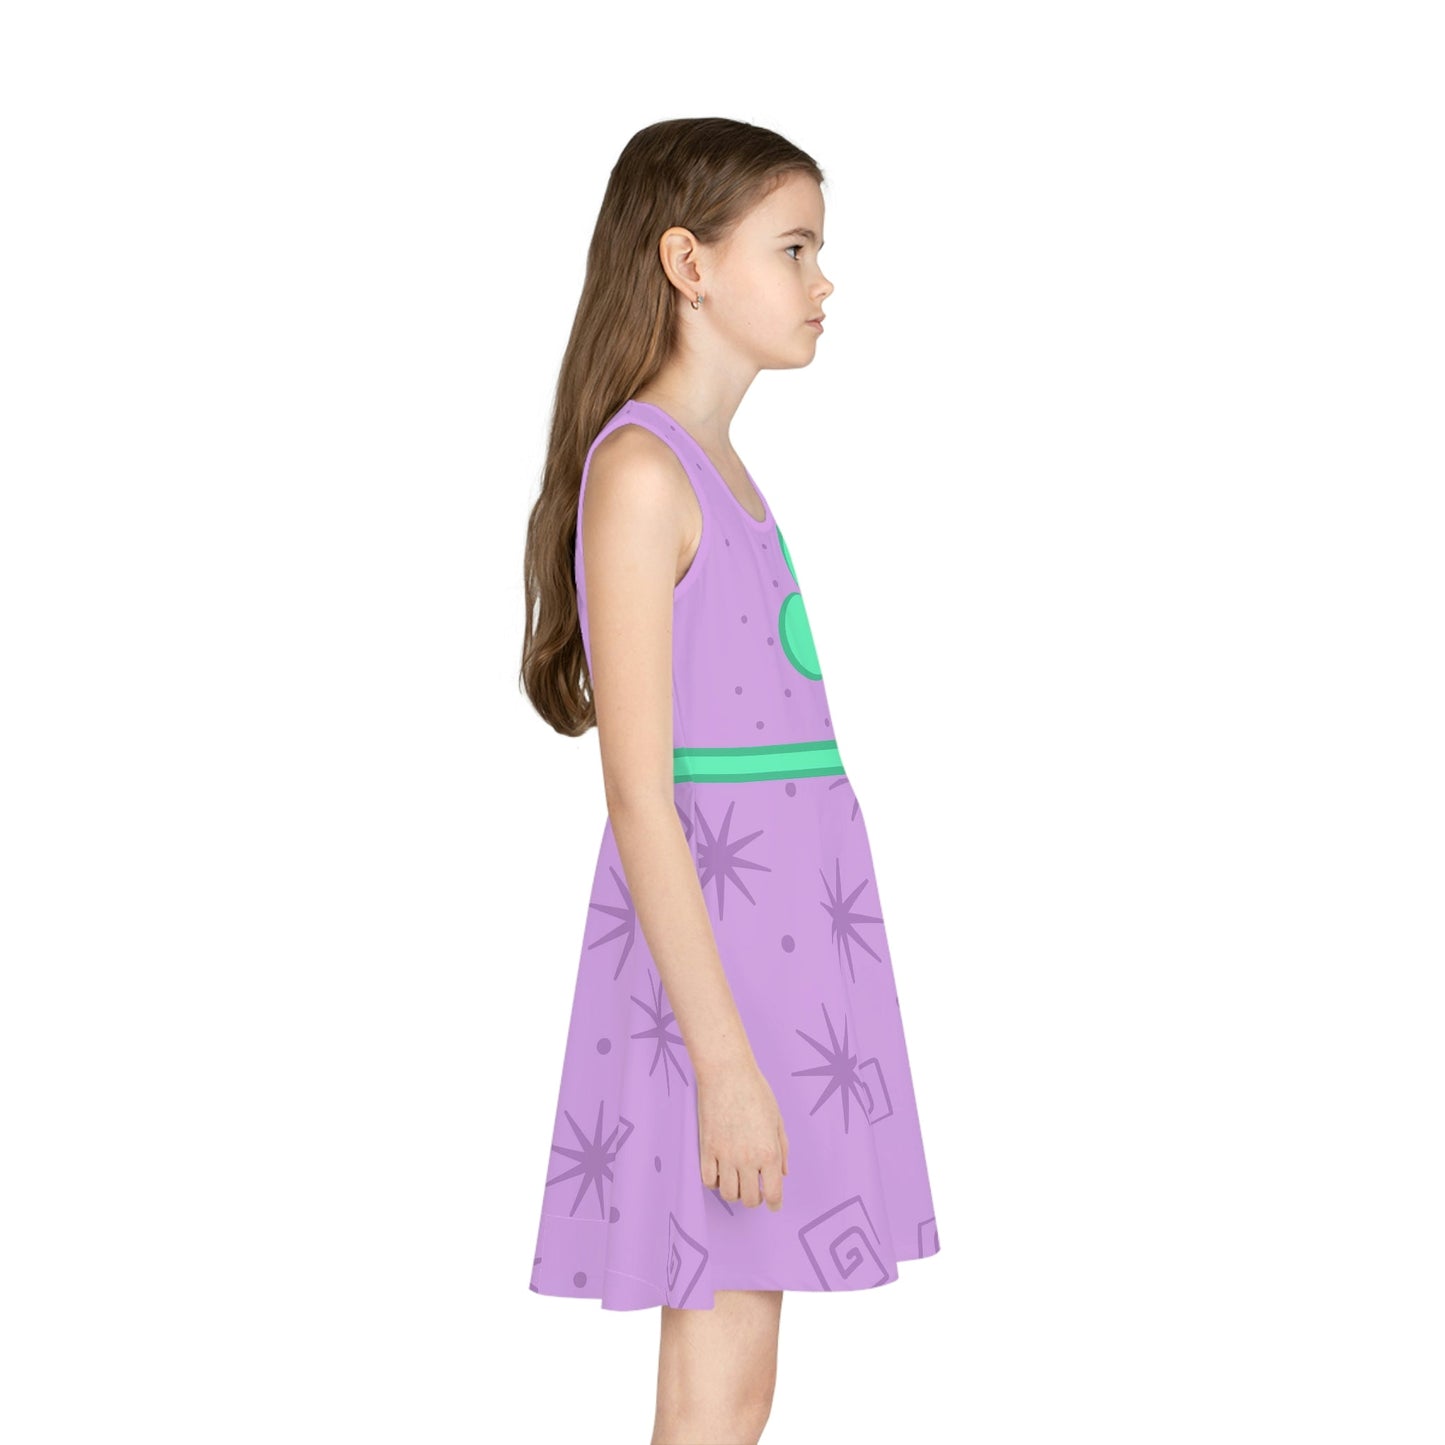 Teacup Ride Inspired Girls' Sleeveless Sundress (AOP) All Over PrintAOPAOP Clothing#tag4##tag5##tag6#